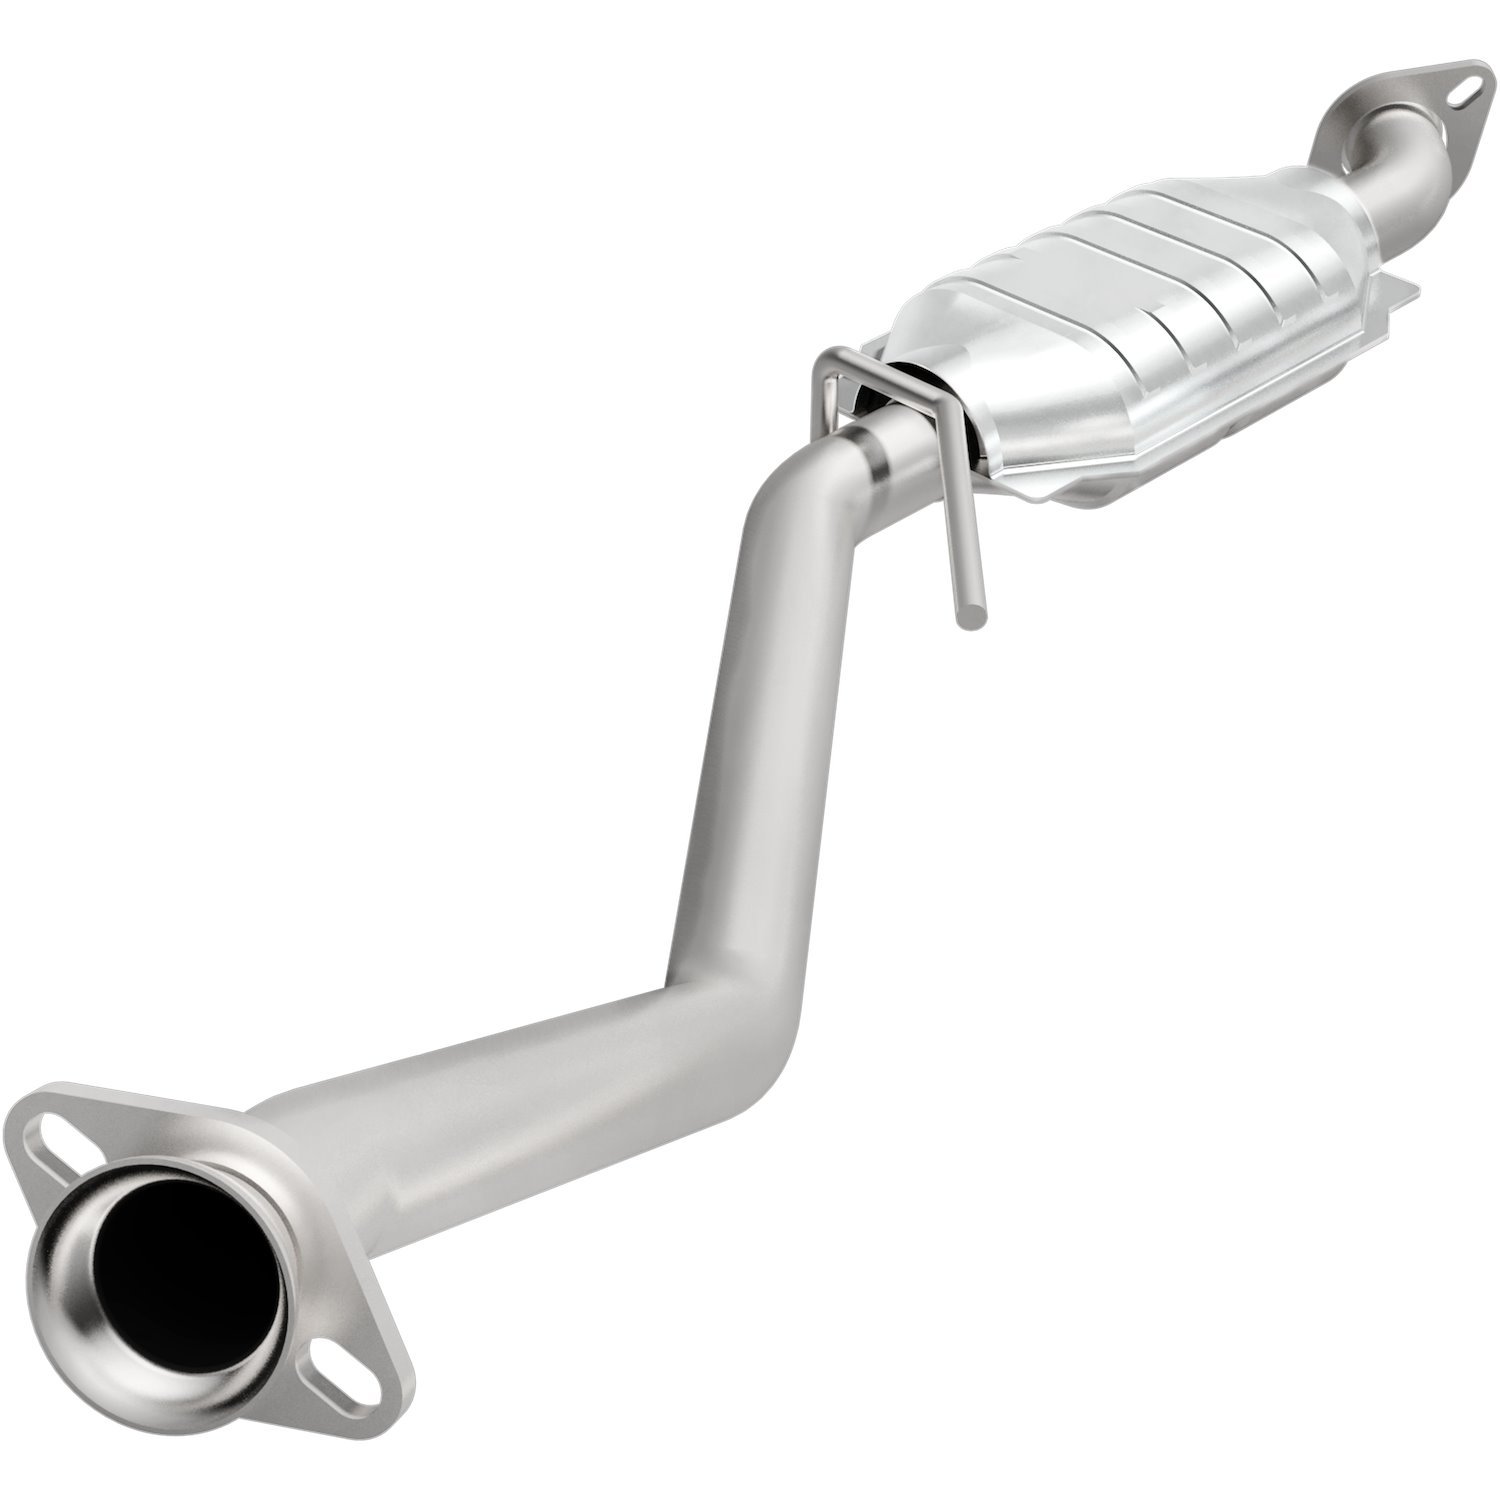 1987-1993 Ford Mustang Standard Grade Federal / EPA Compliant Direct-Fit Catalytic Converter